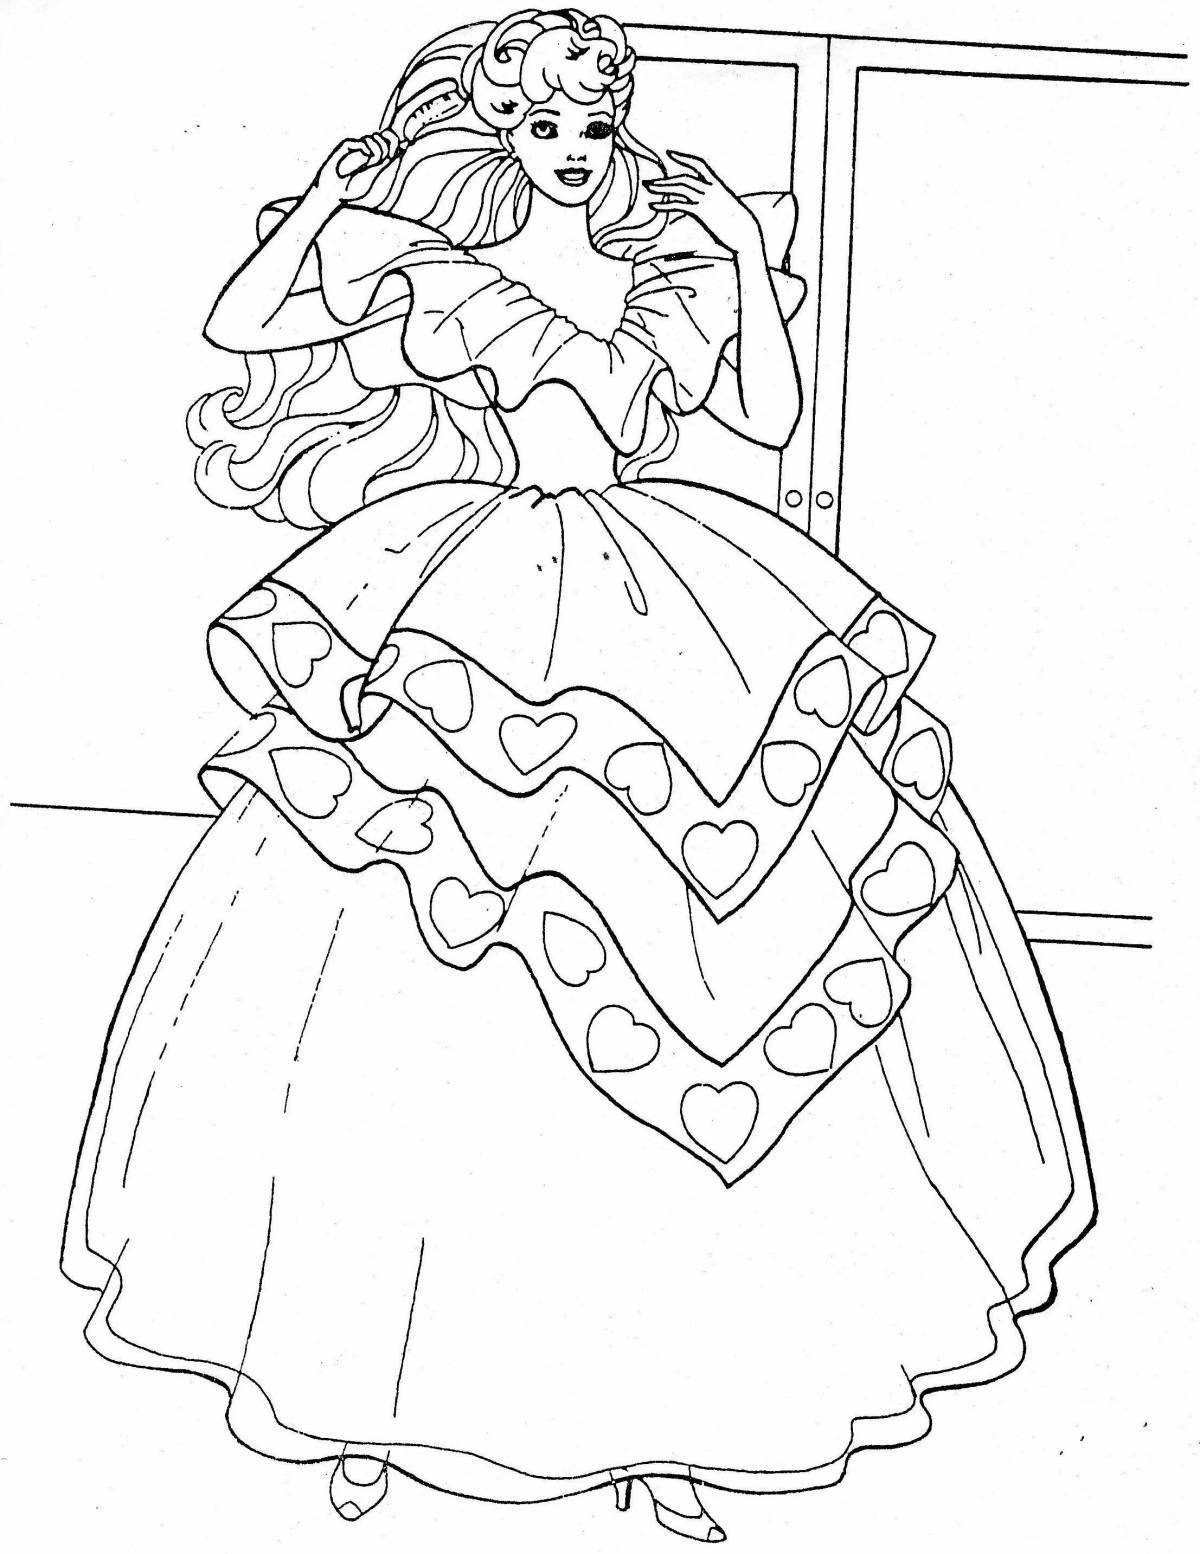 Great 90s barbie coloring book